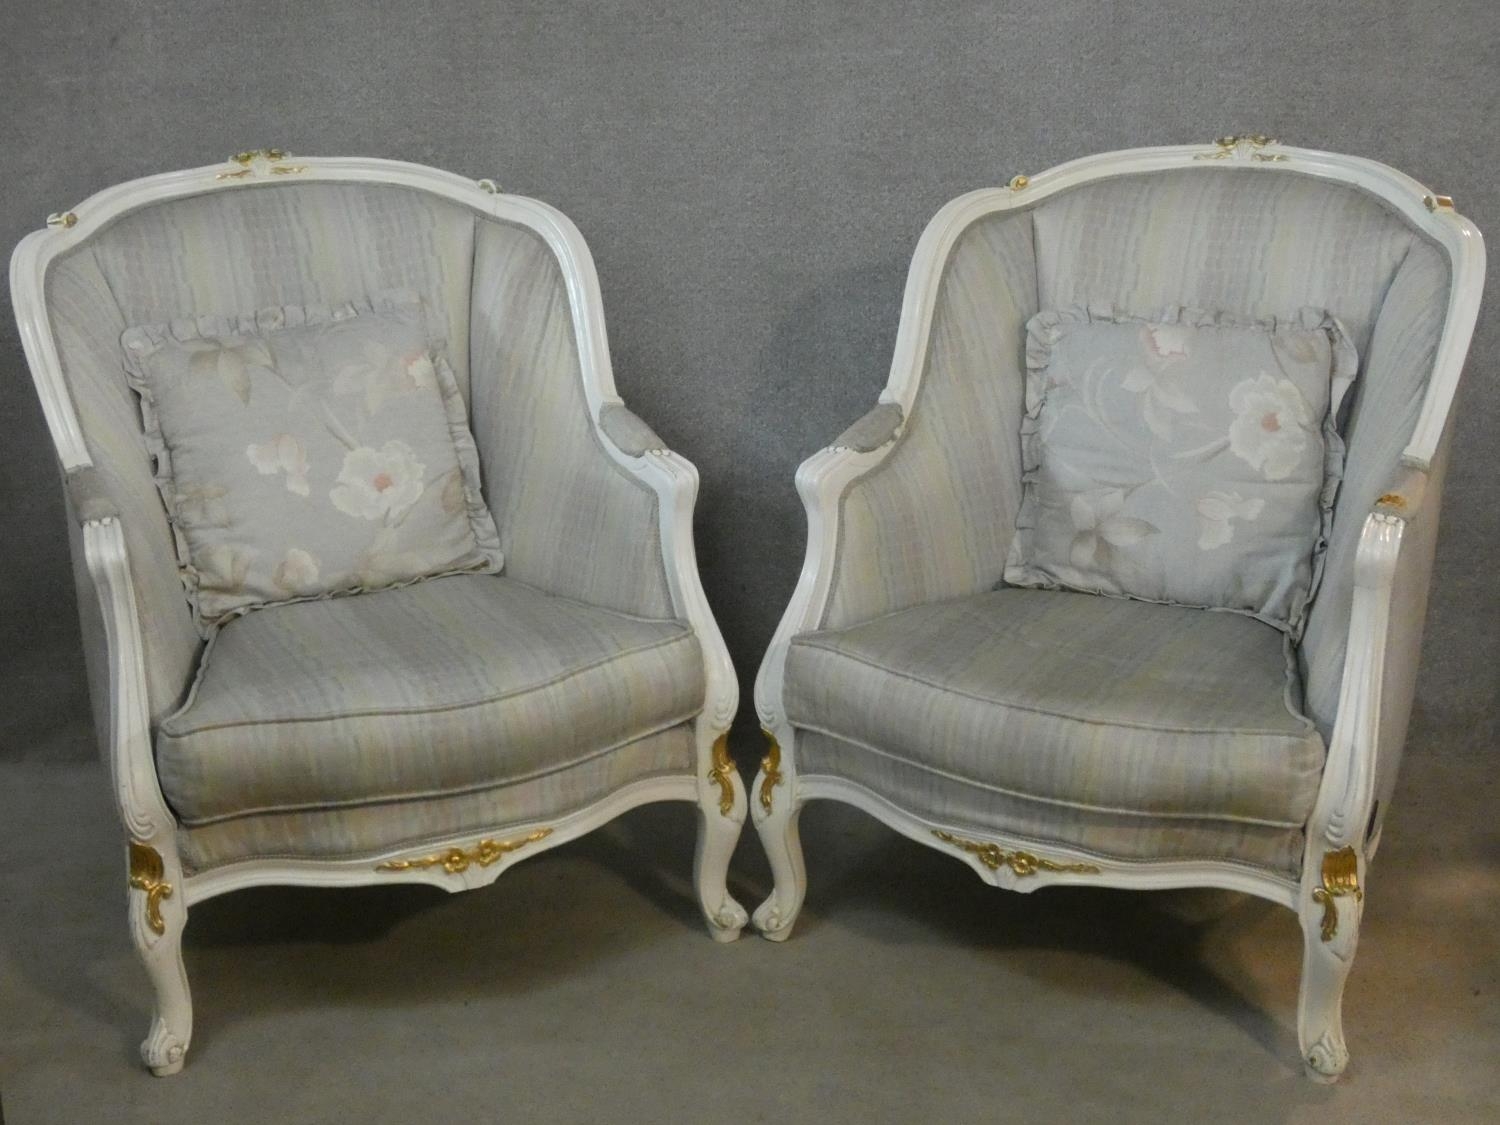 A pair of Louis XV style tub armchairs in damask upholstery and gilt and white painted frames on